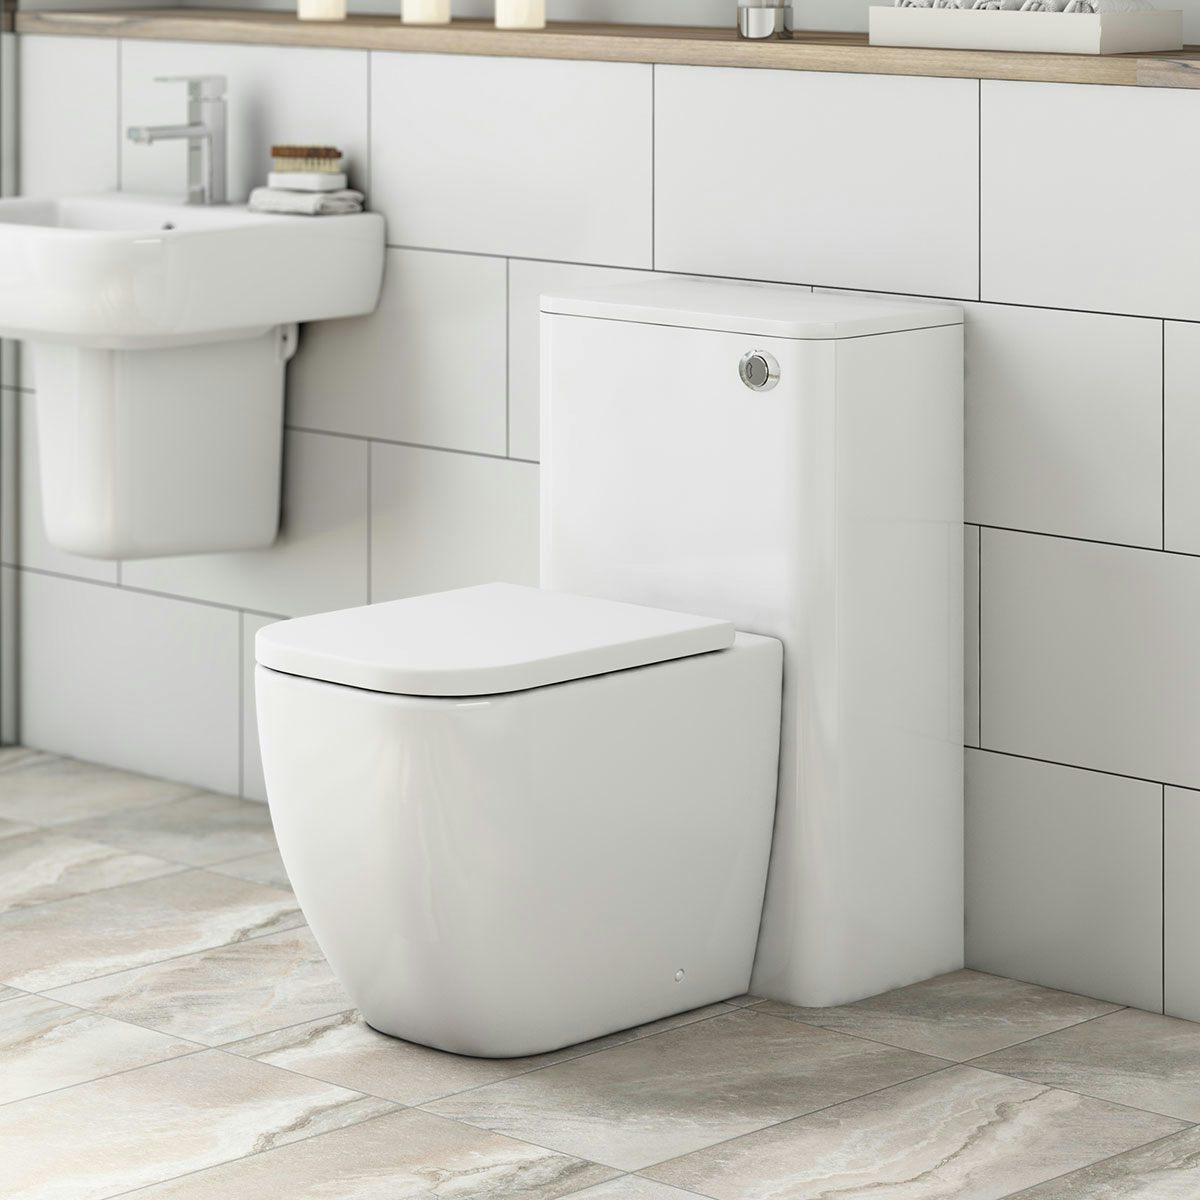 Mode Positano back to wall toilet inc soft close seat